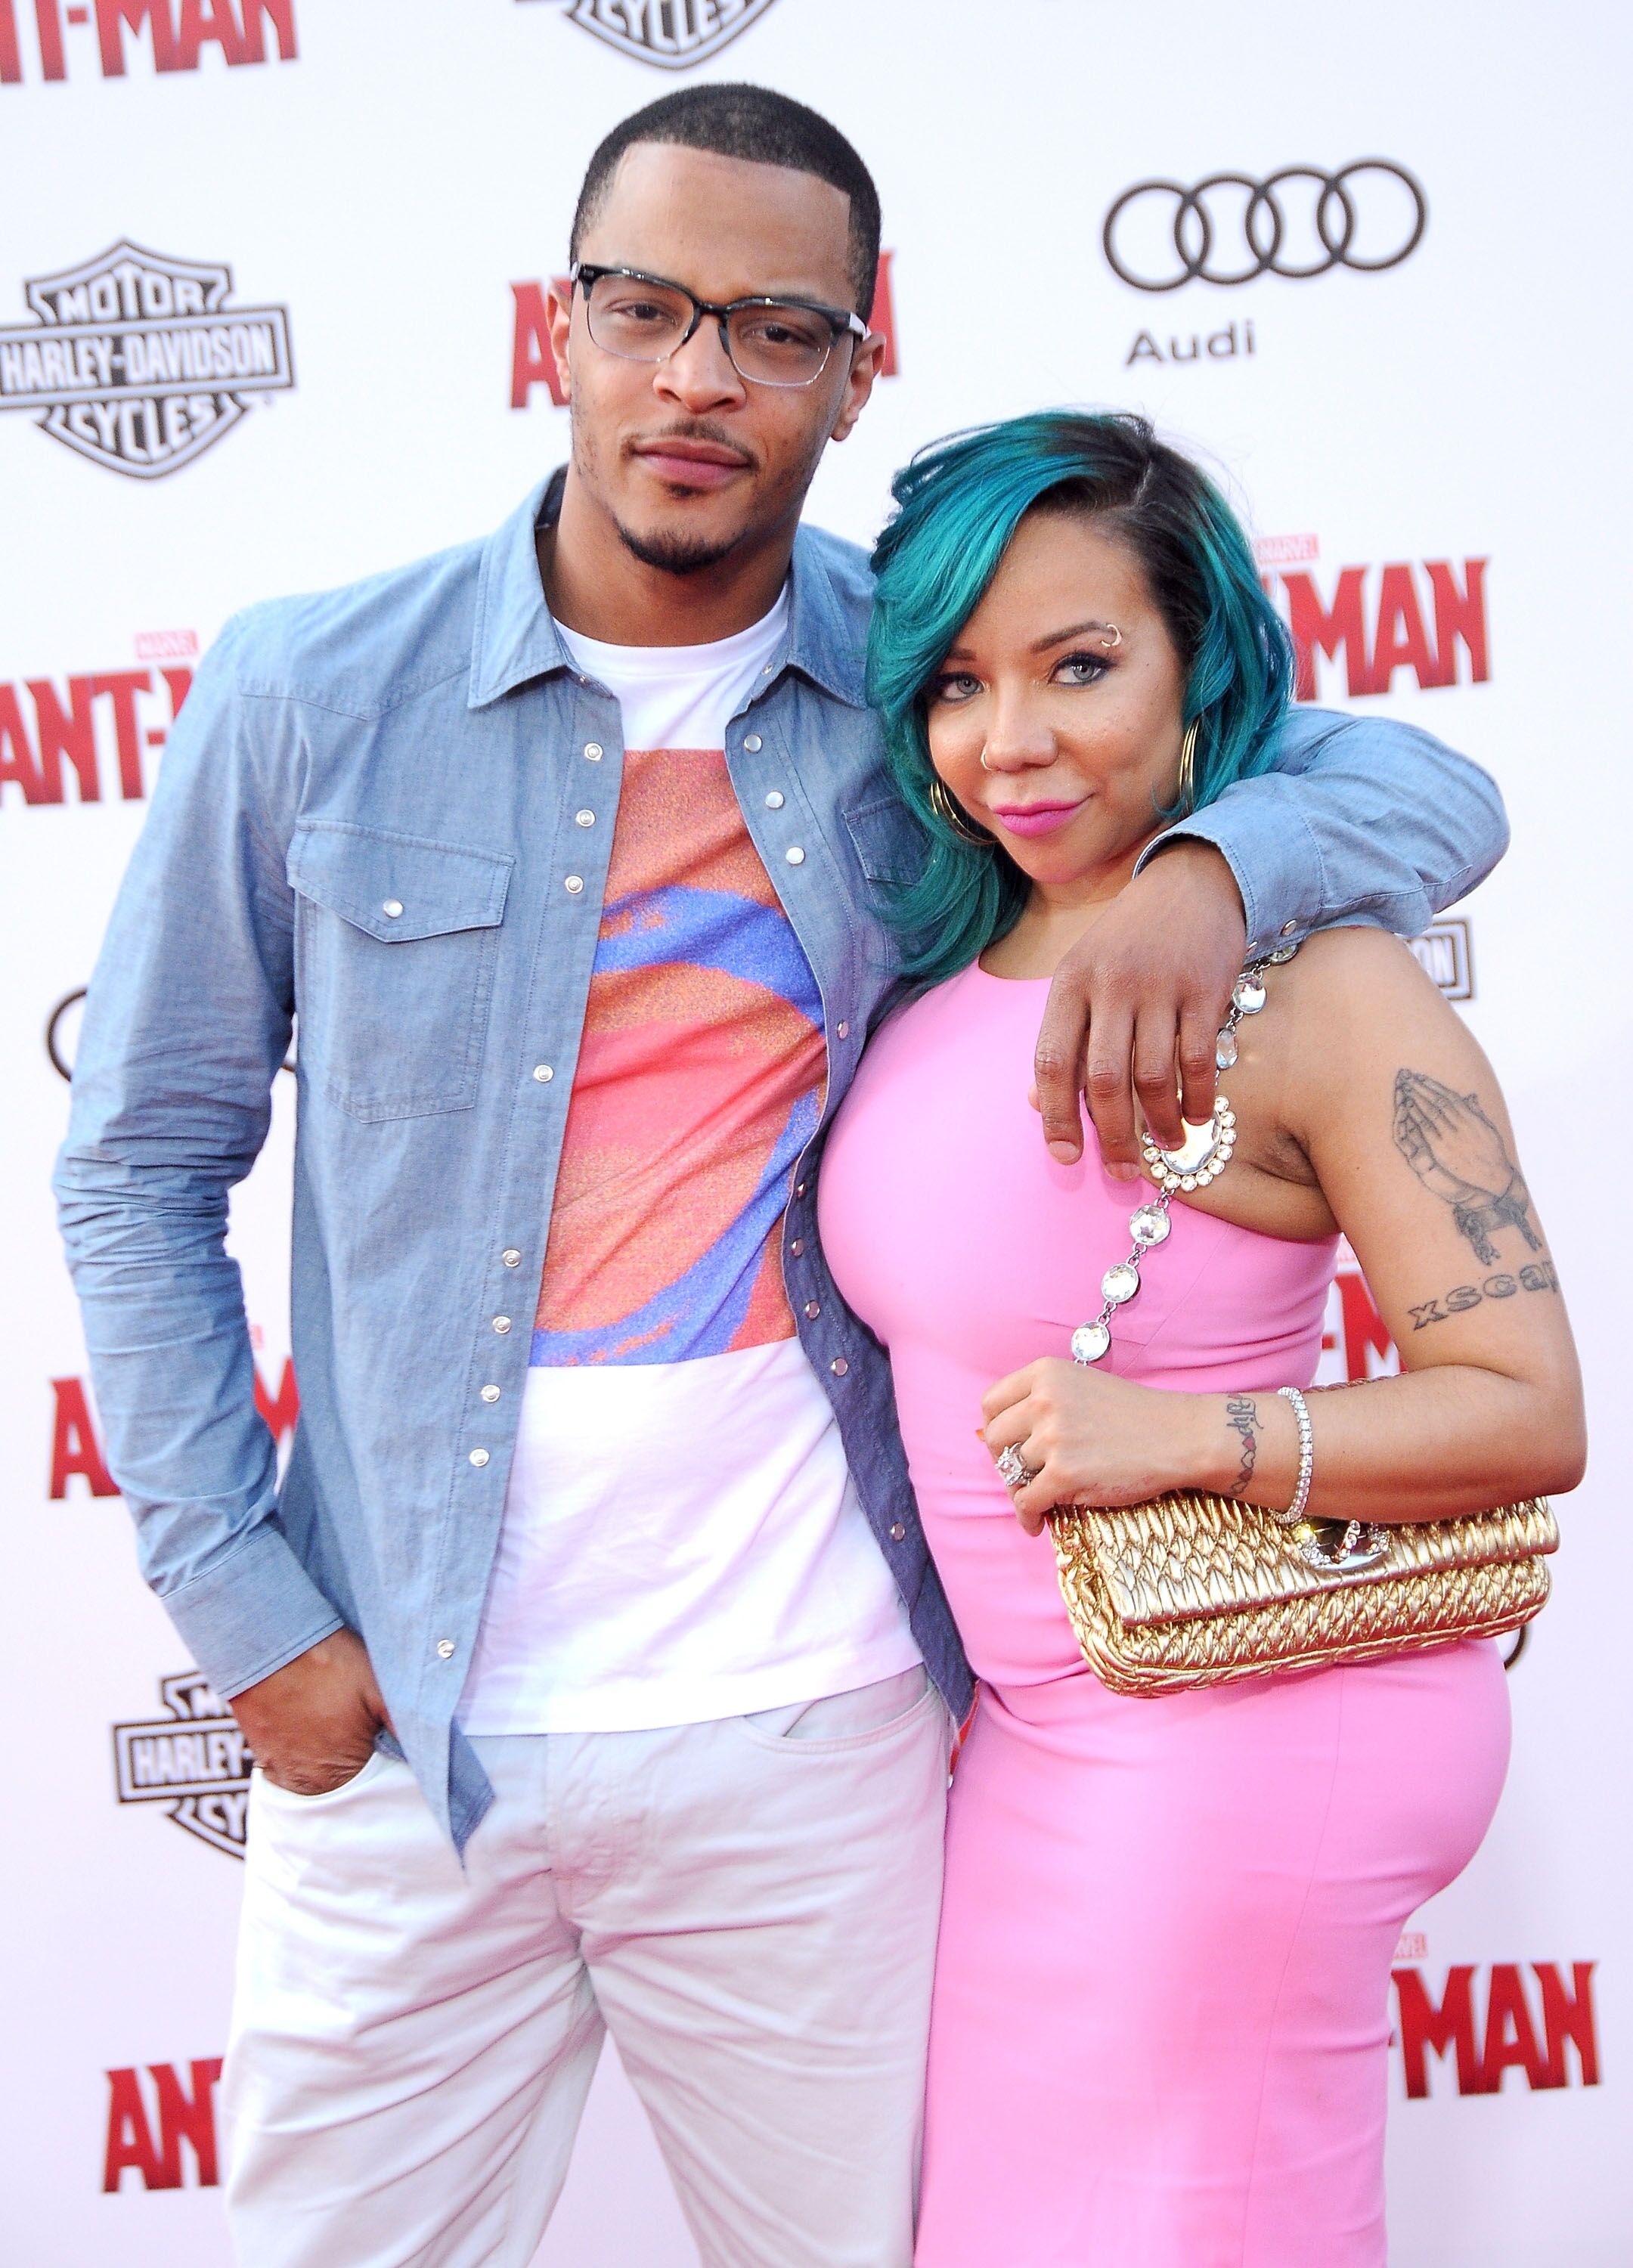 Rapper Tip "T.I." Harris and his wife Tiny at the "Antman" premiere | Photo: Getty Images